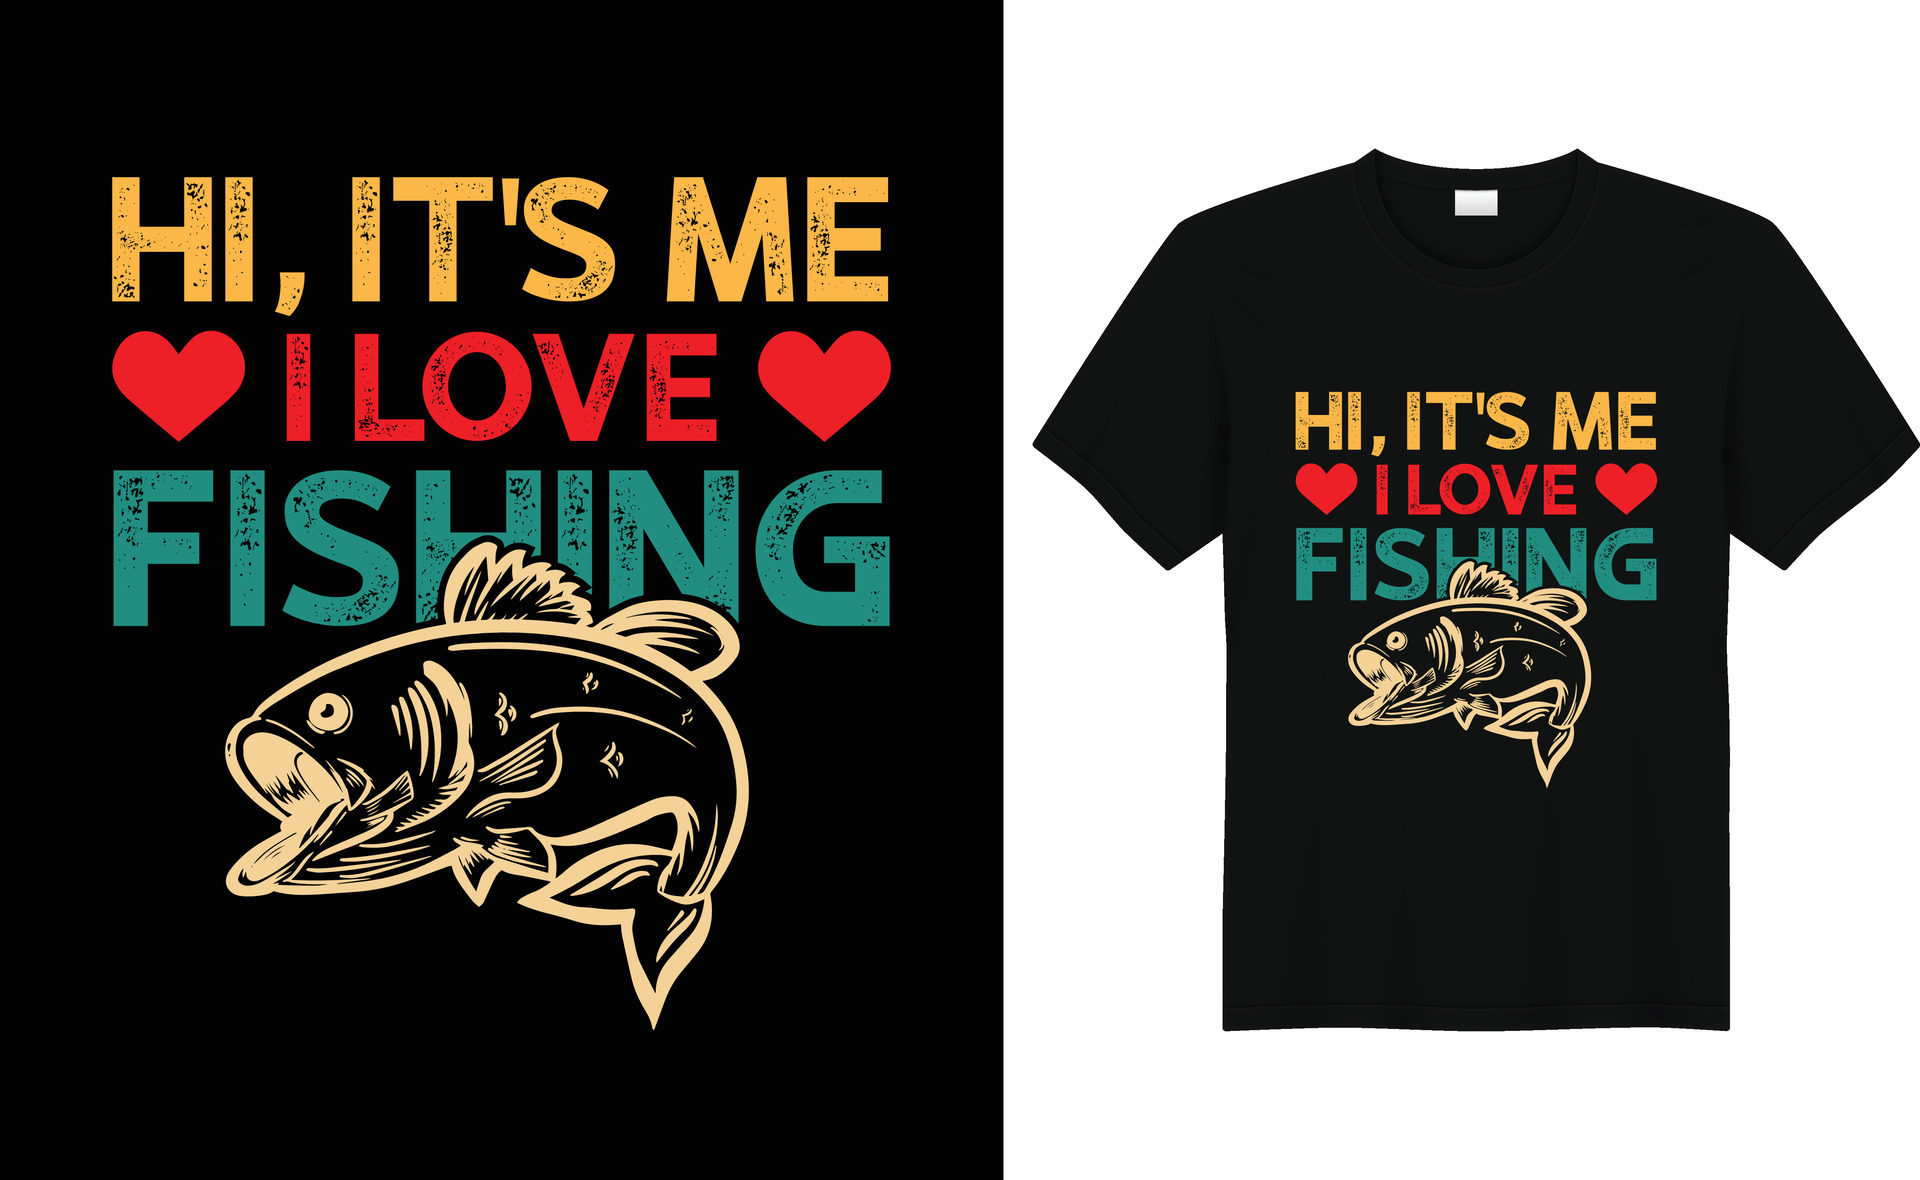 https://static.vecteezy.com/system/resources/previews/027/161/599/original/funny-bass-fishing-father-gift-dad-fishing-gift-fisherman-fishing-tshirt-design-silhouette-free-vector.jpg